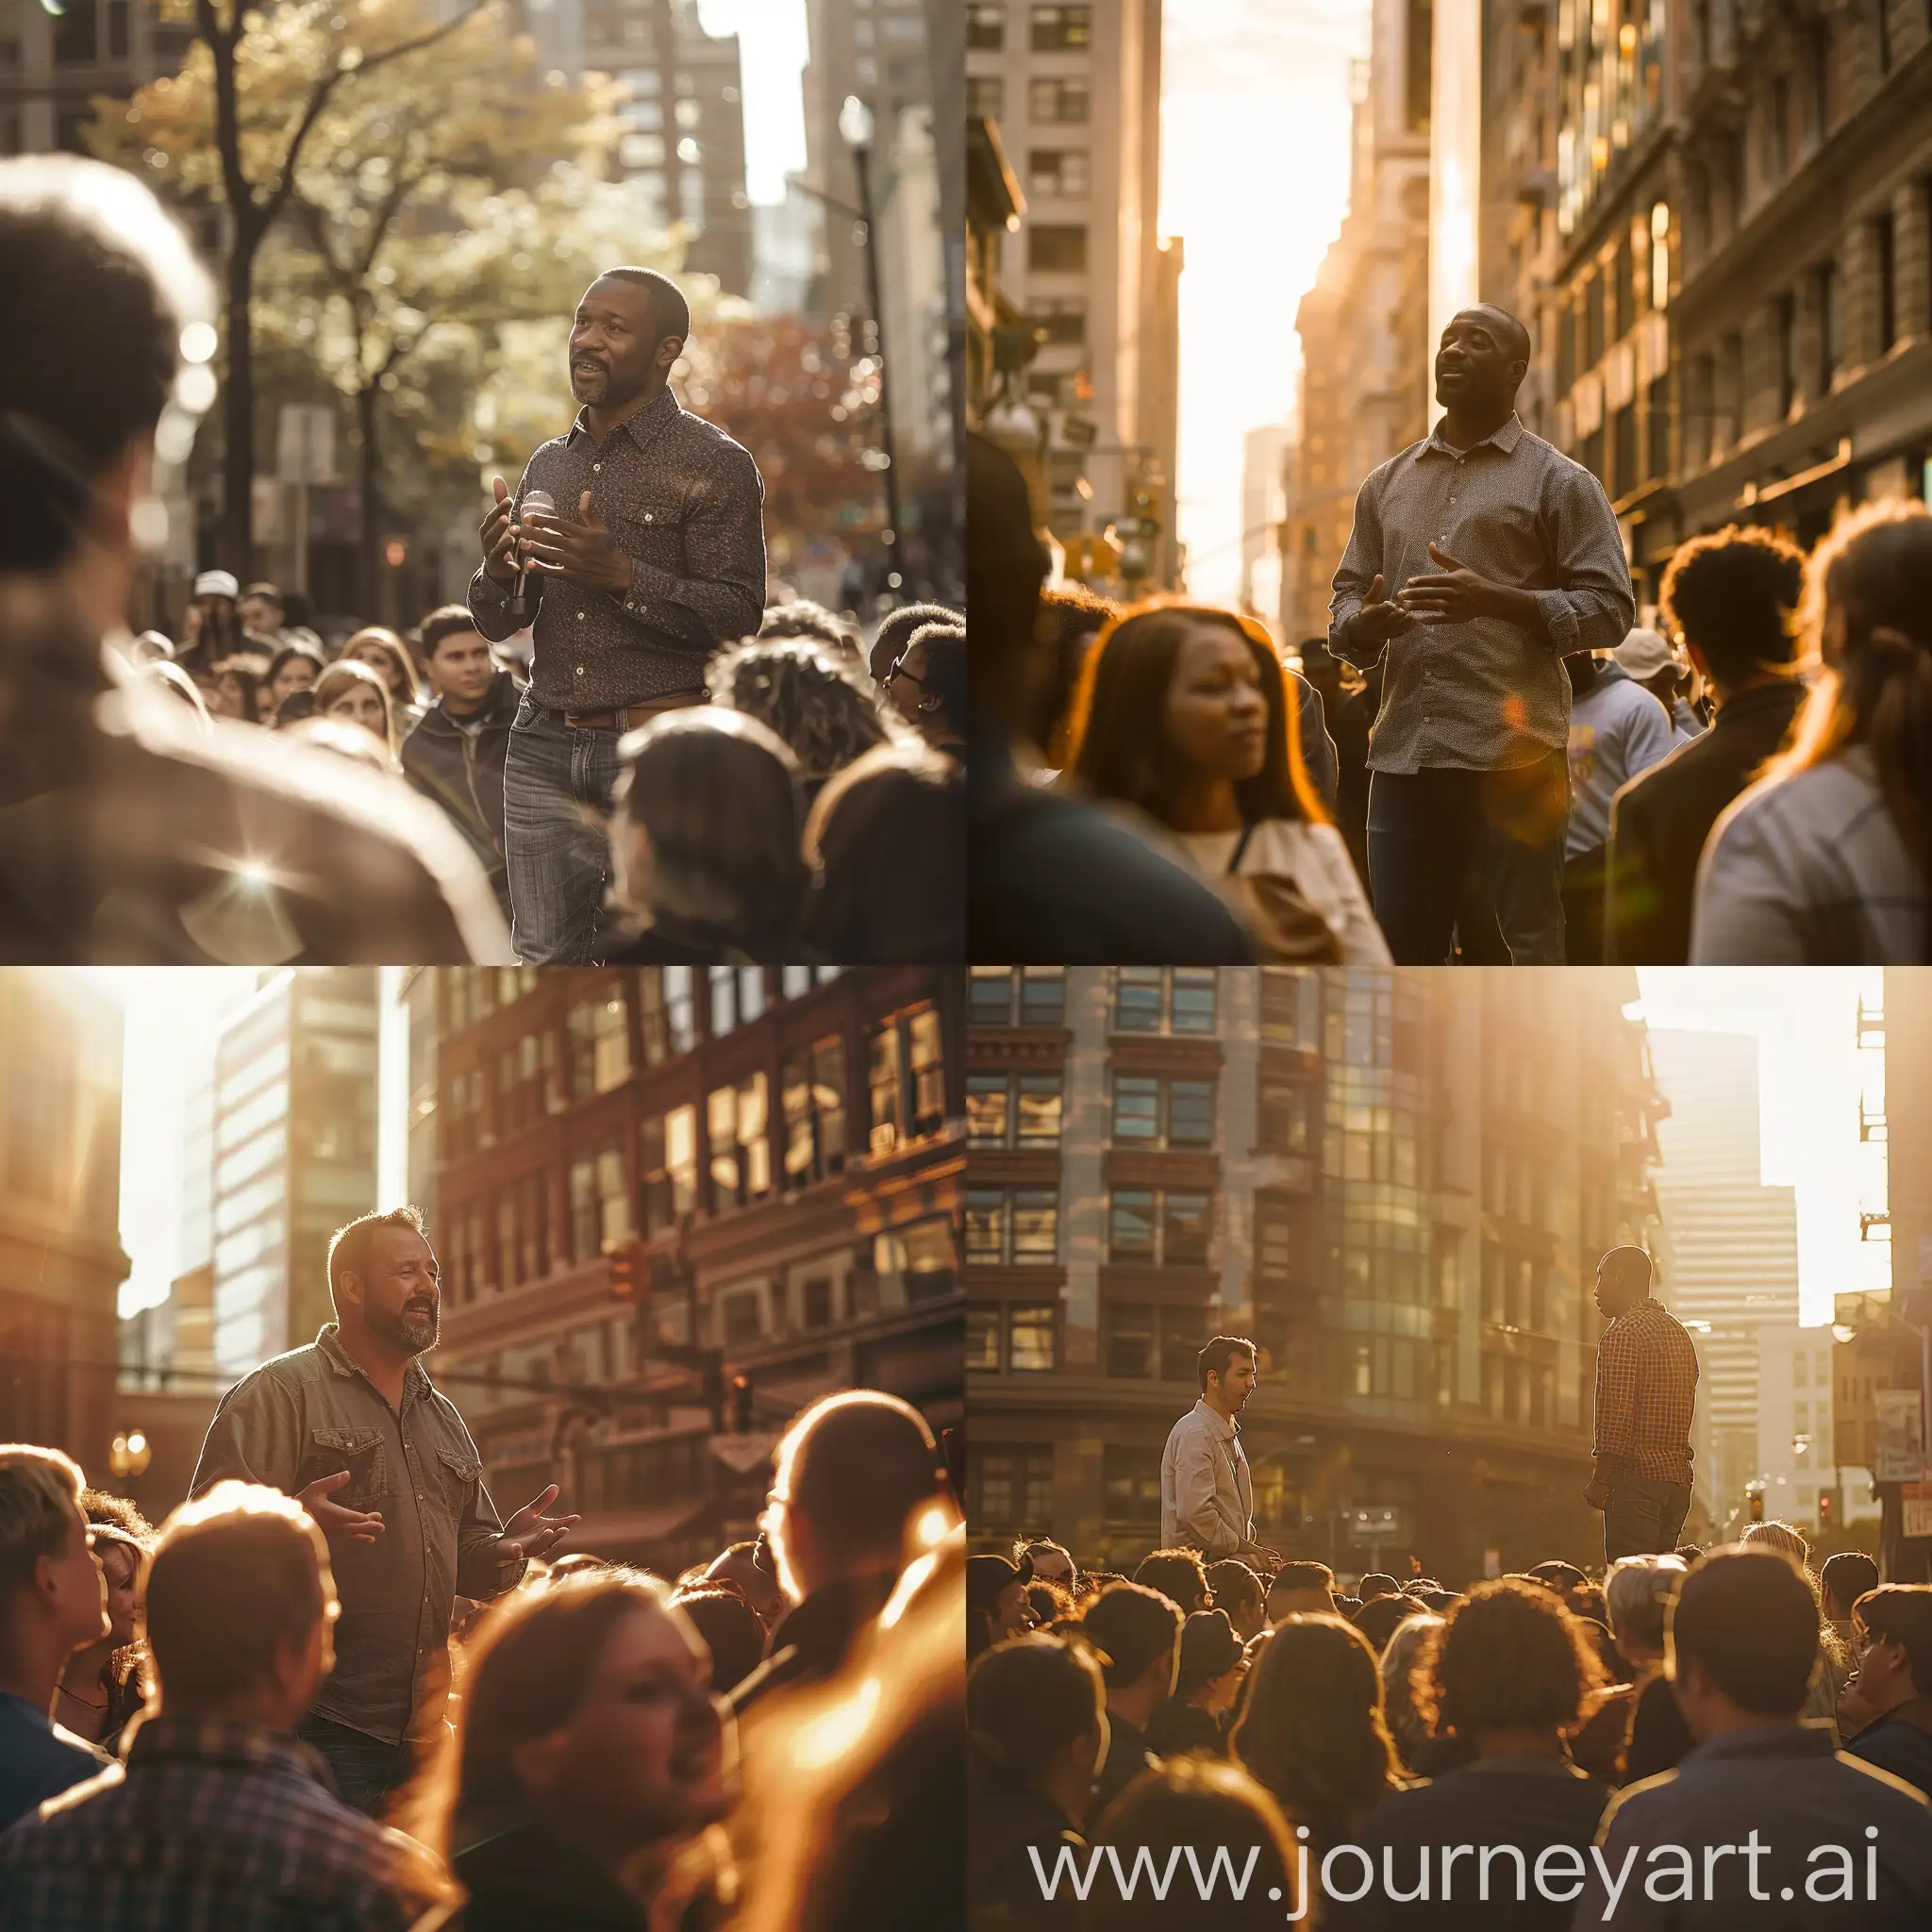 Urban-Pastor-Preaching-to-Crowd-in-Golden-Hour-Light